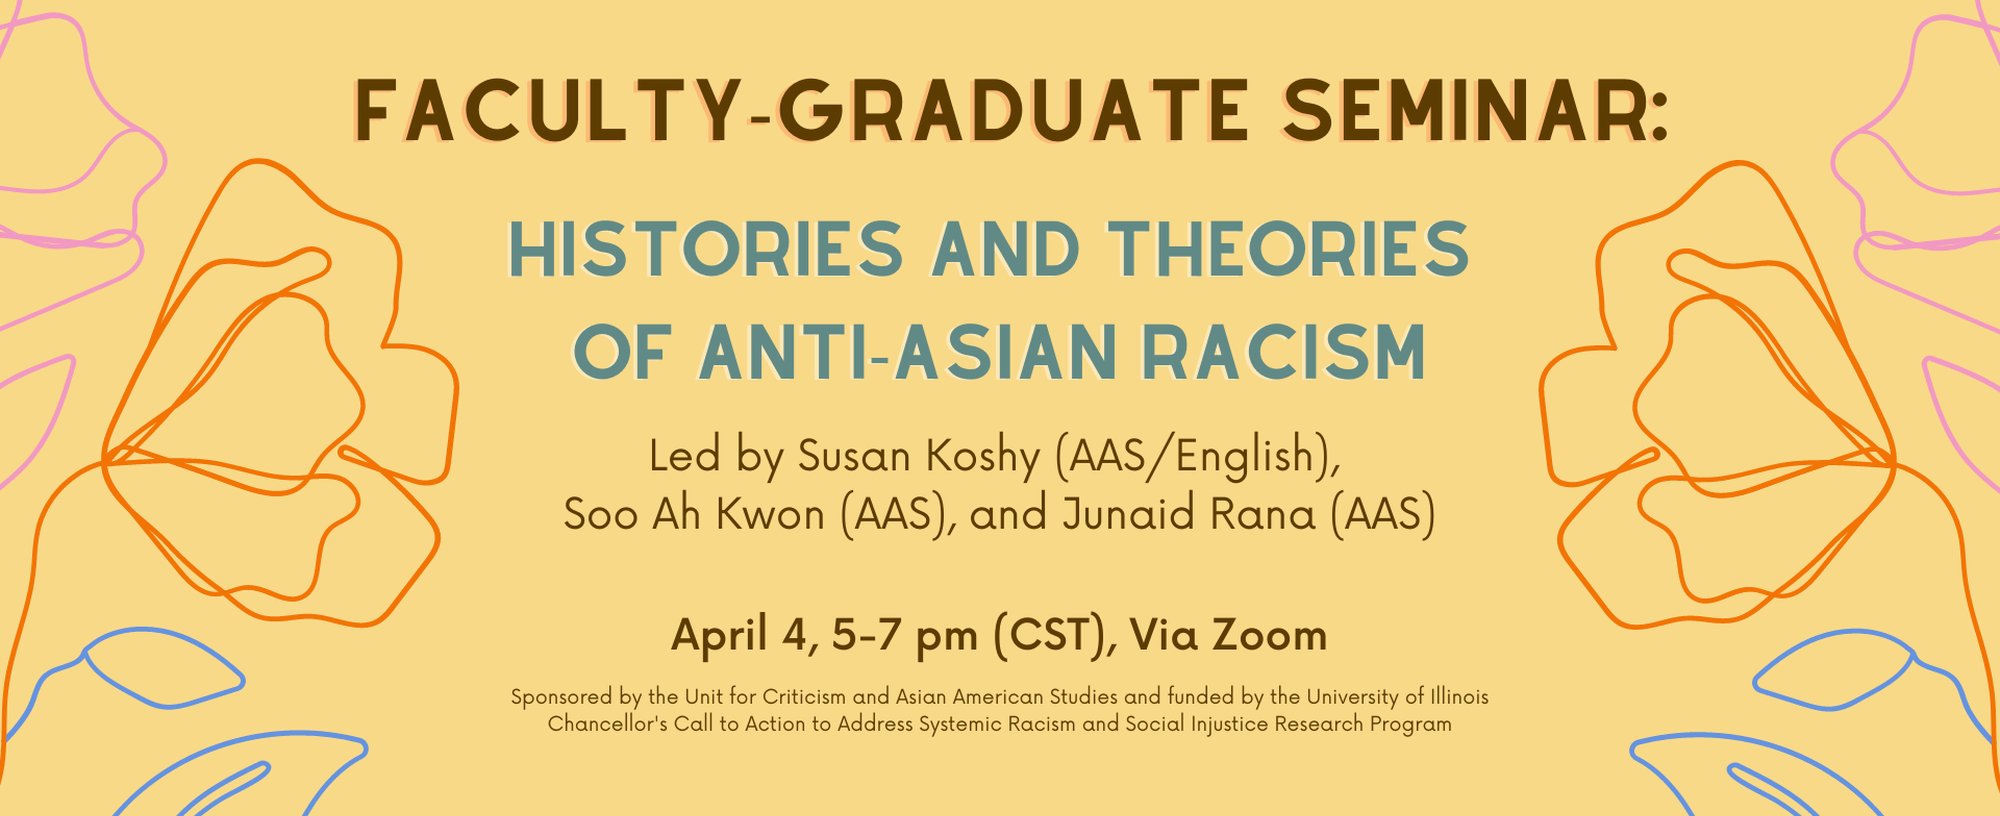 the faculty graduate seminar on histories and theories of anti-asian racism will take place April 4, 5-7pm cst